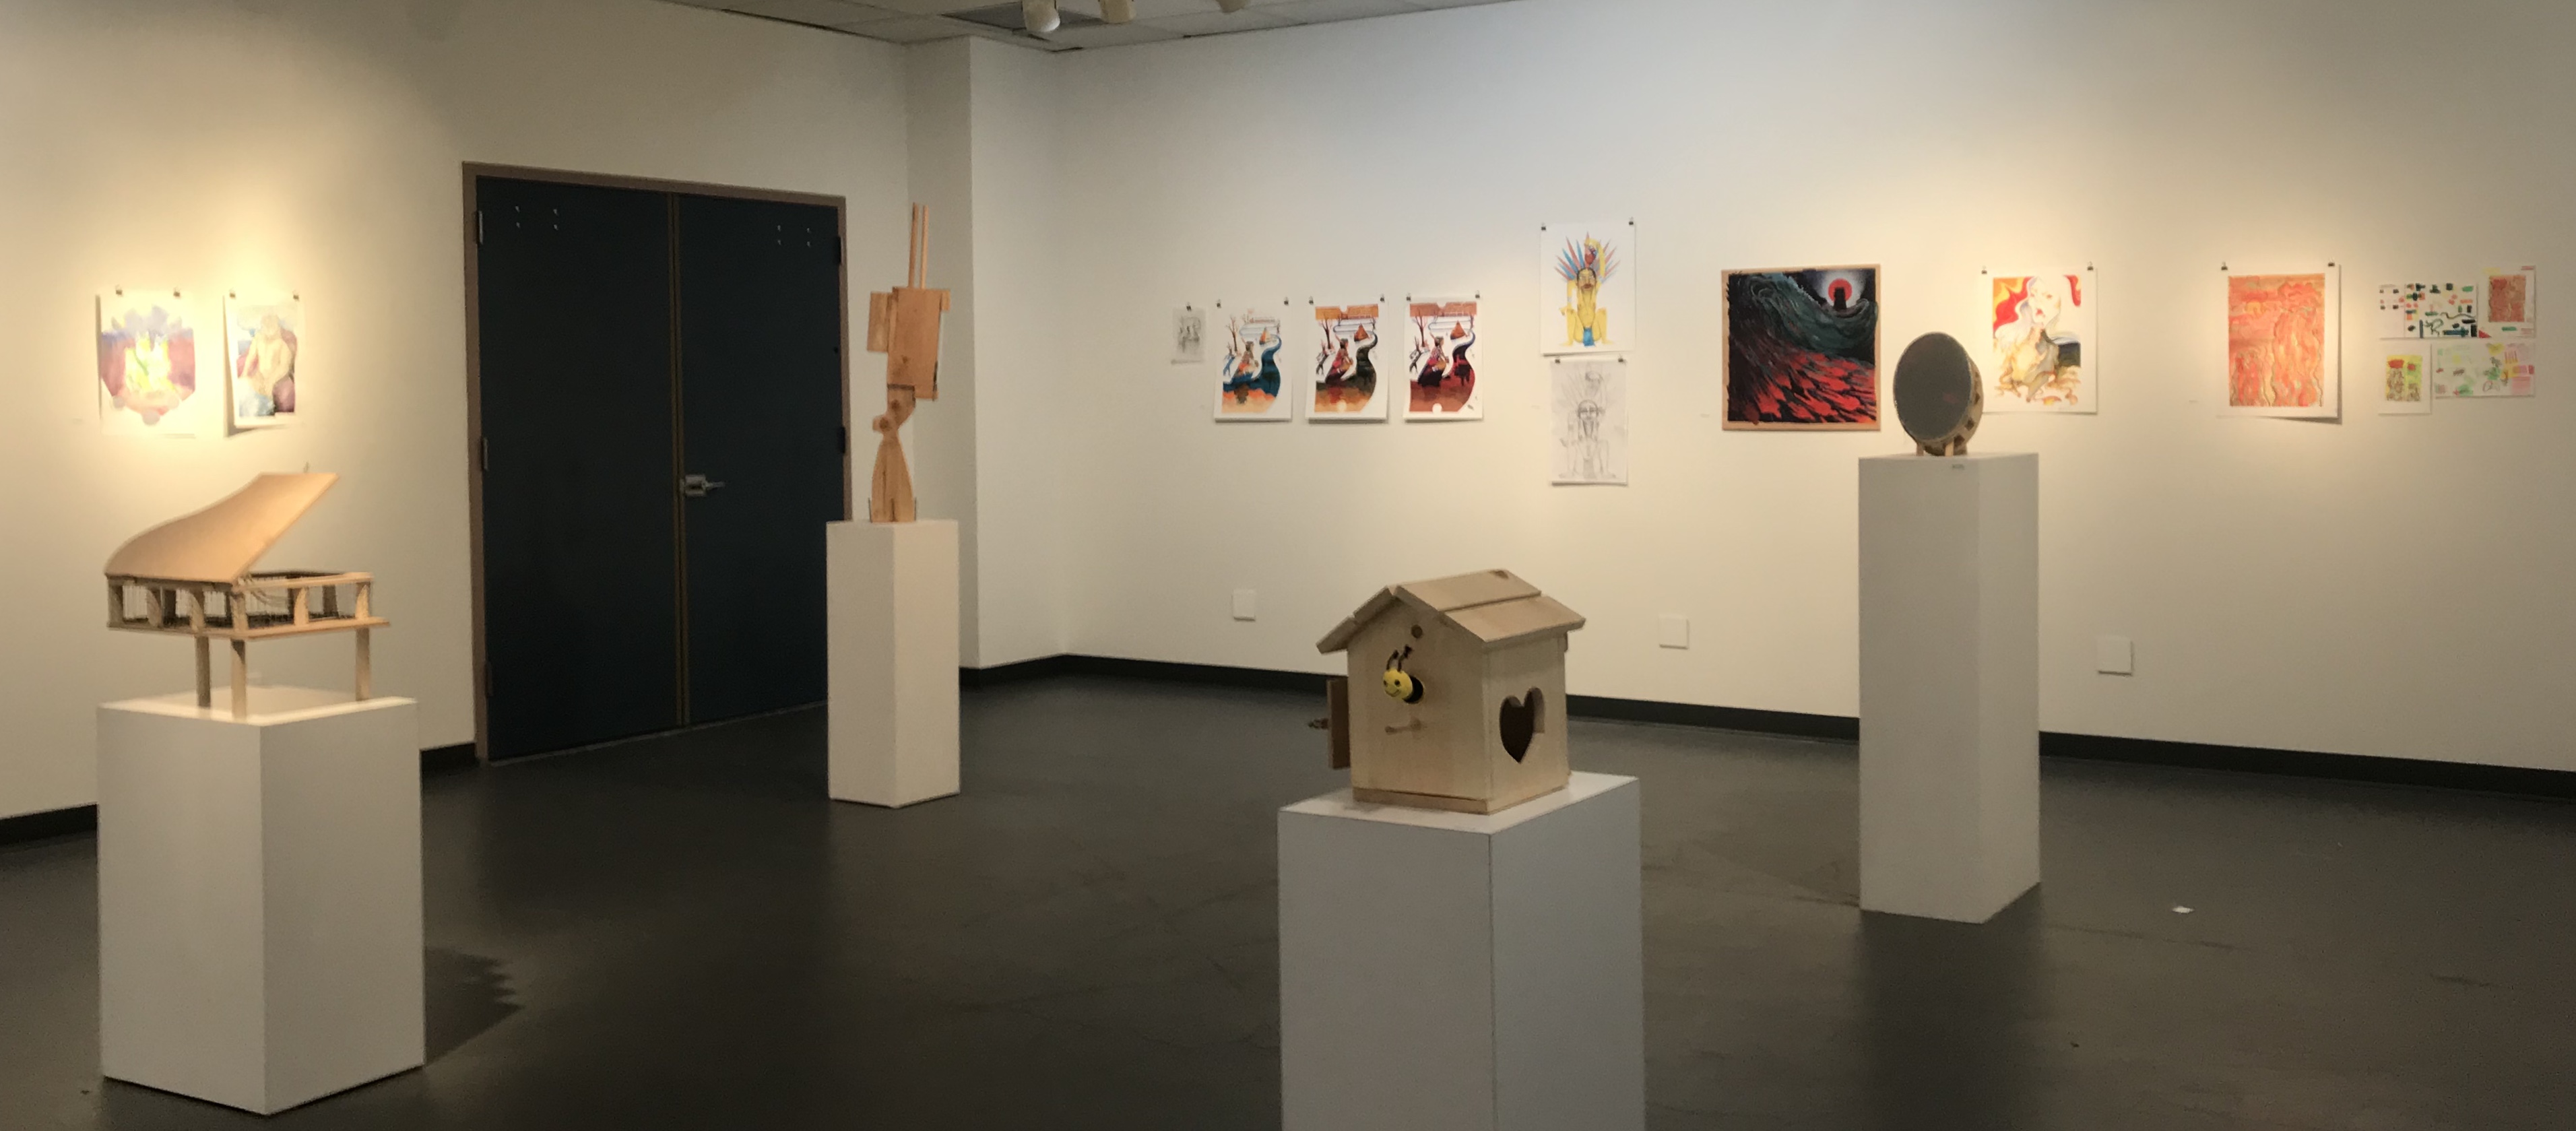 ON VIEW Fall 2019